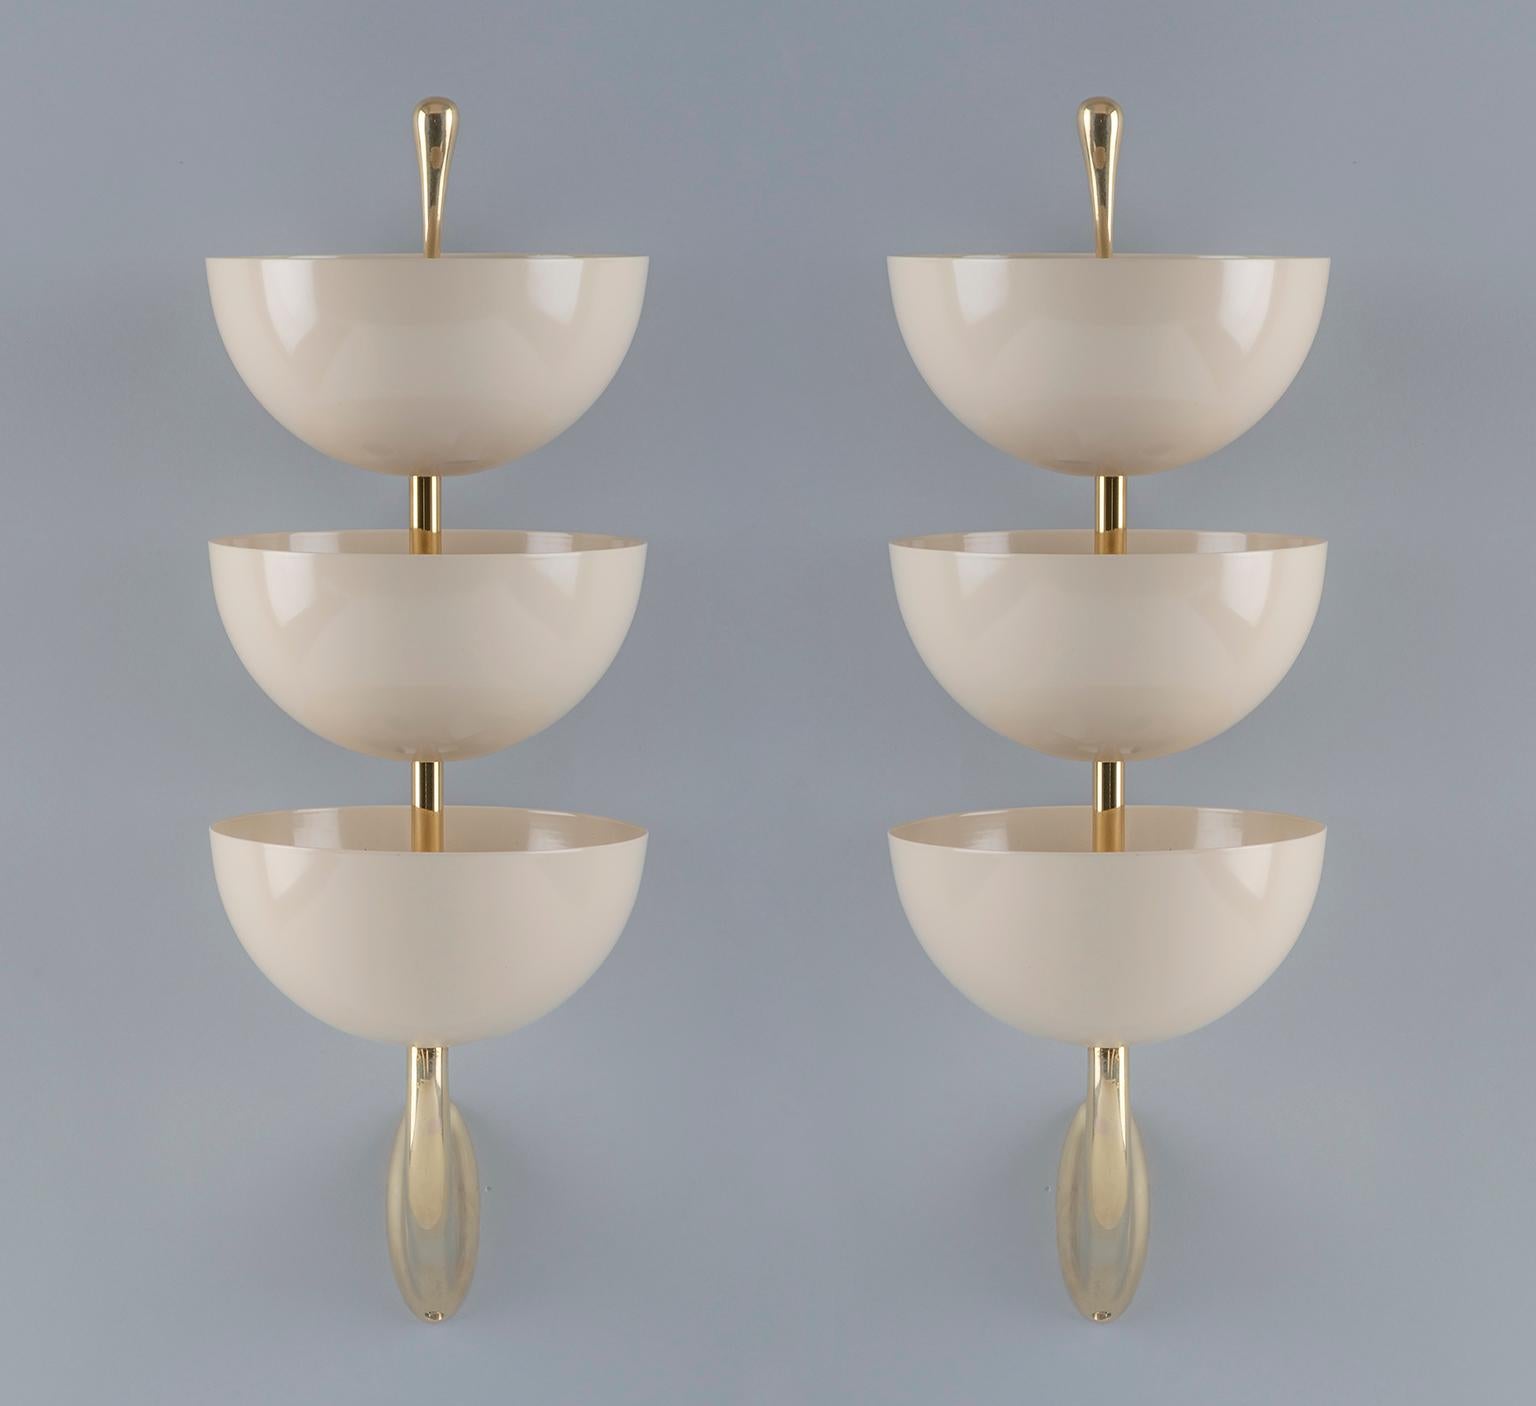 Italian Exquisite Pair of Tiered White Enamel and Brass Sconces by Stilnovo, Italy 1950s